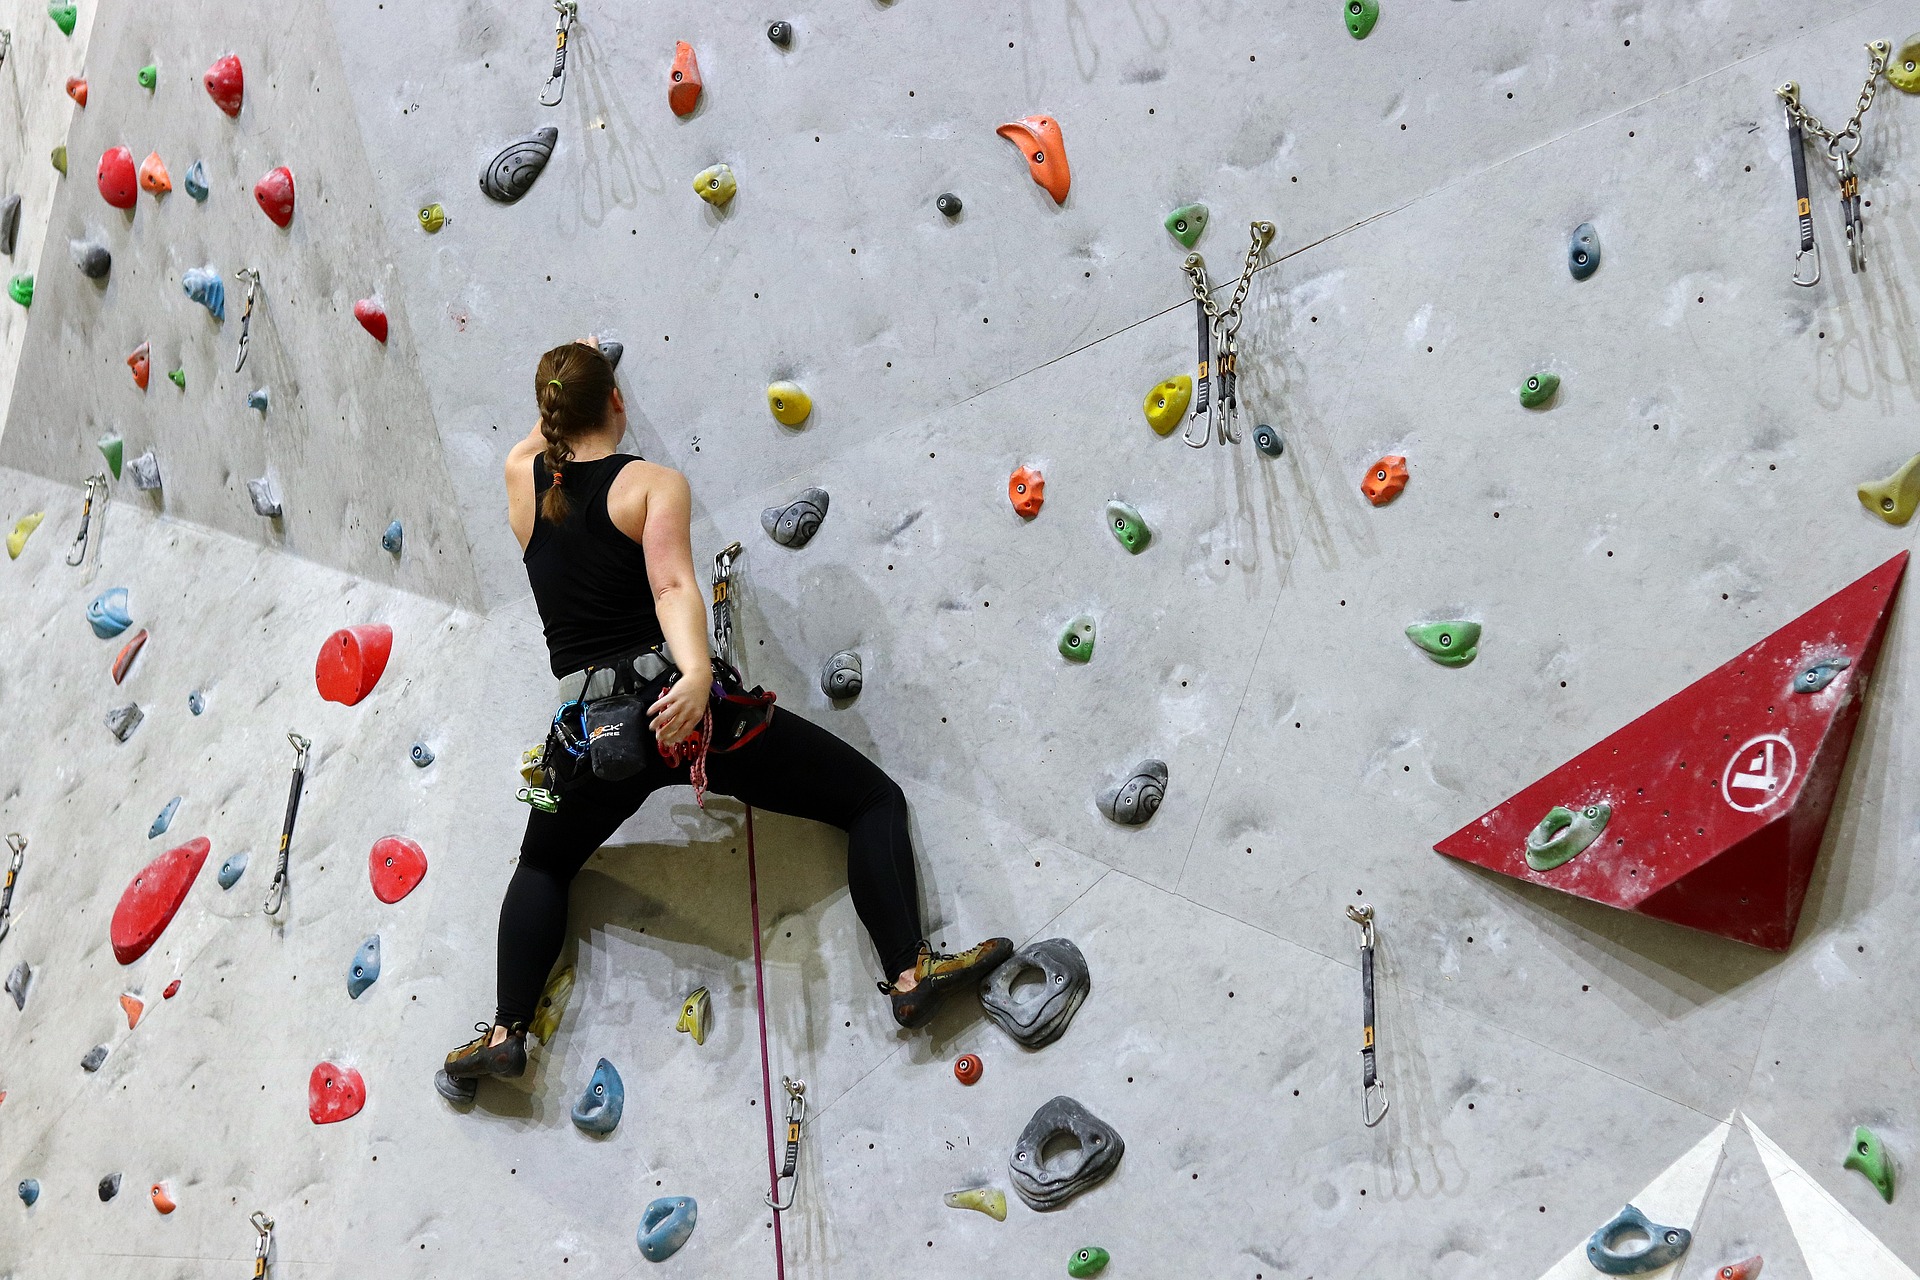 Sport Climbing Indoors And Muscle Treatment With Massage Therapy